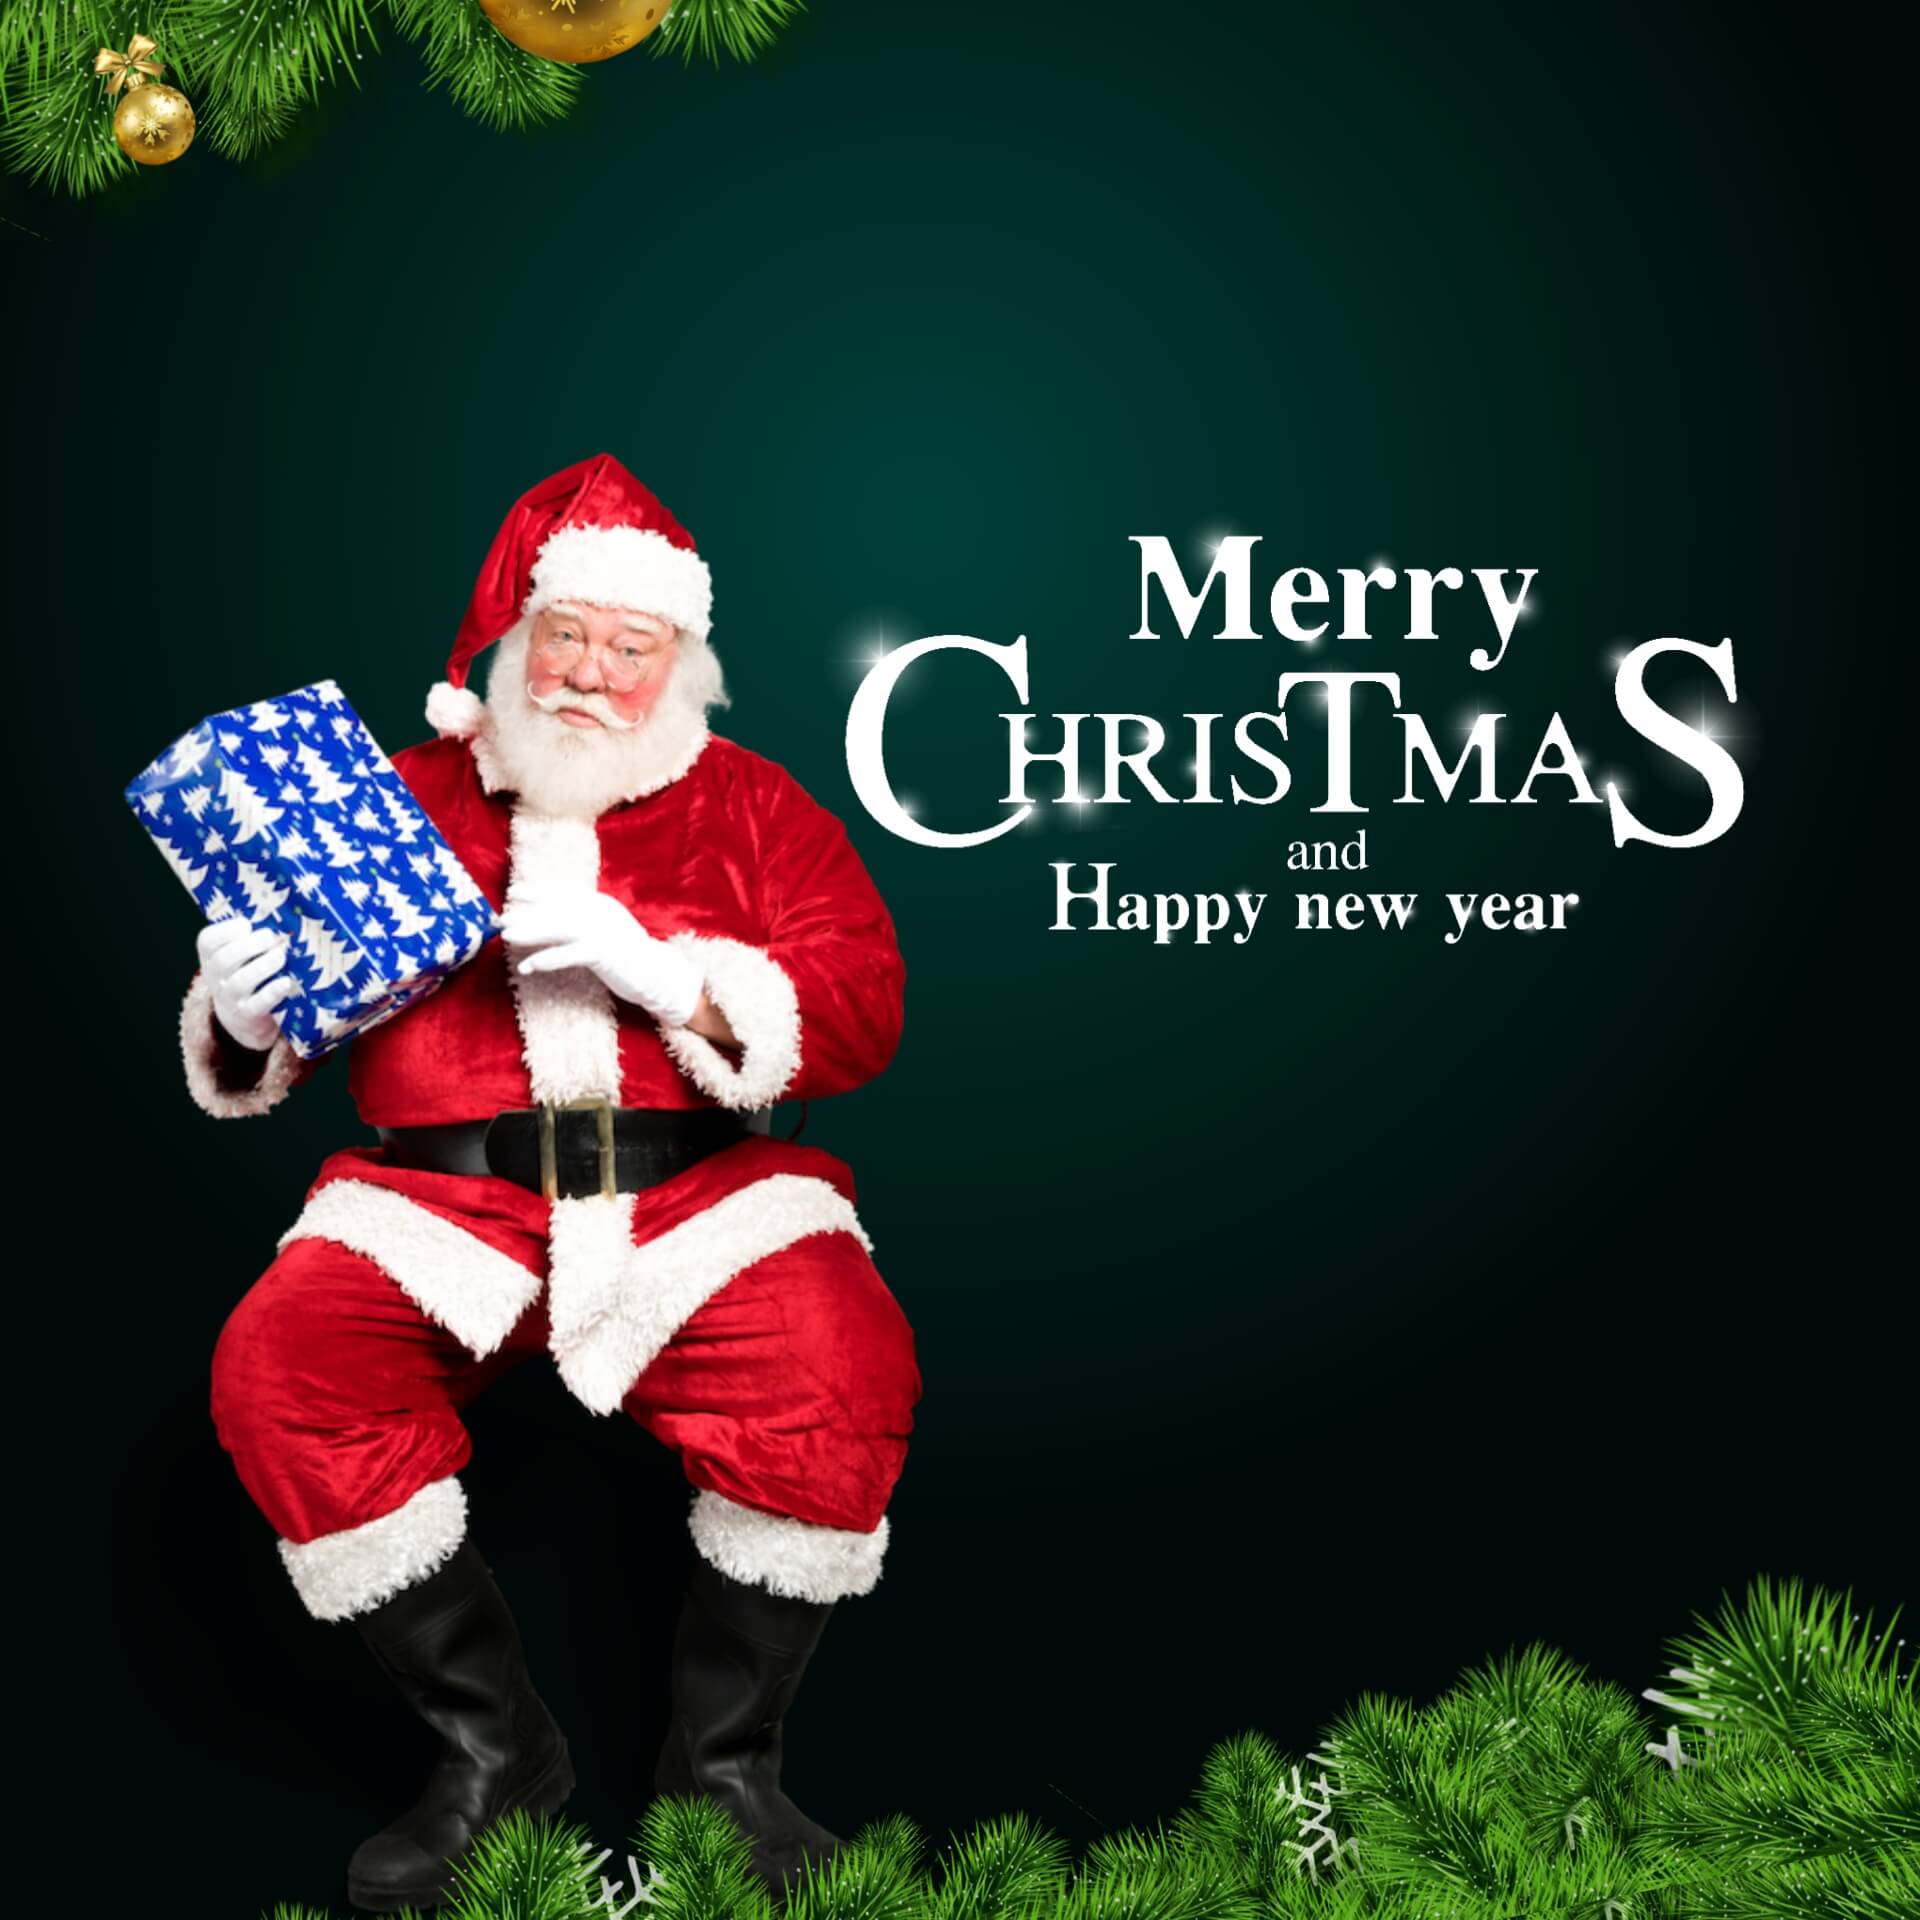 Santa claus Merry Christmas Images